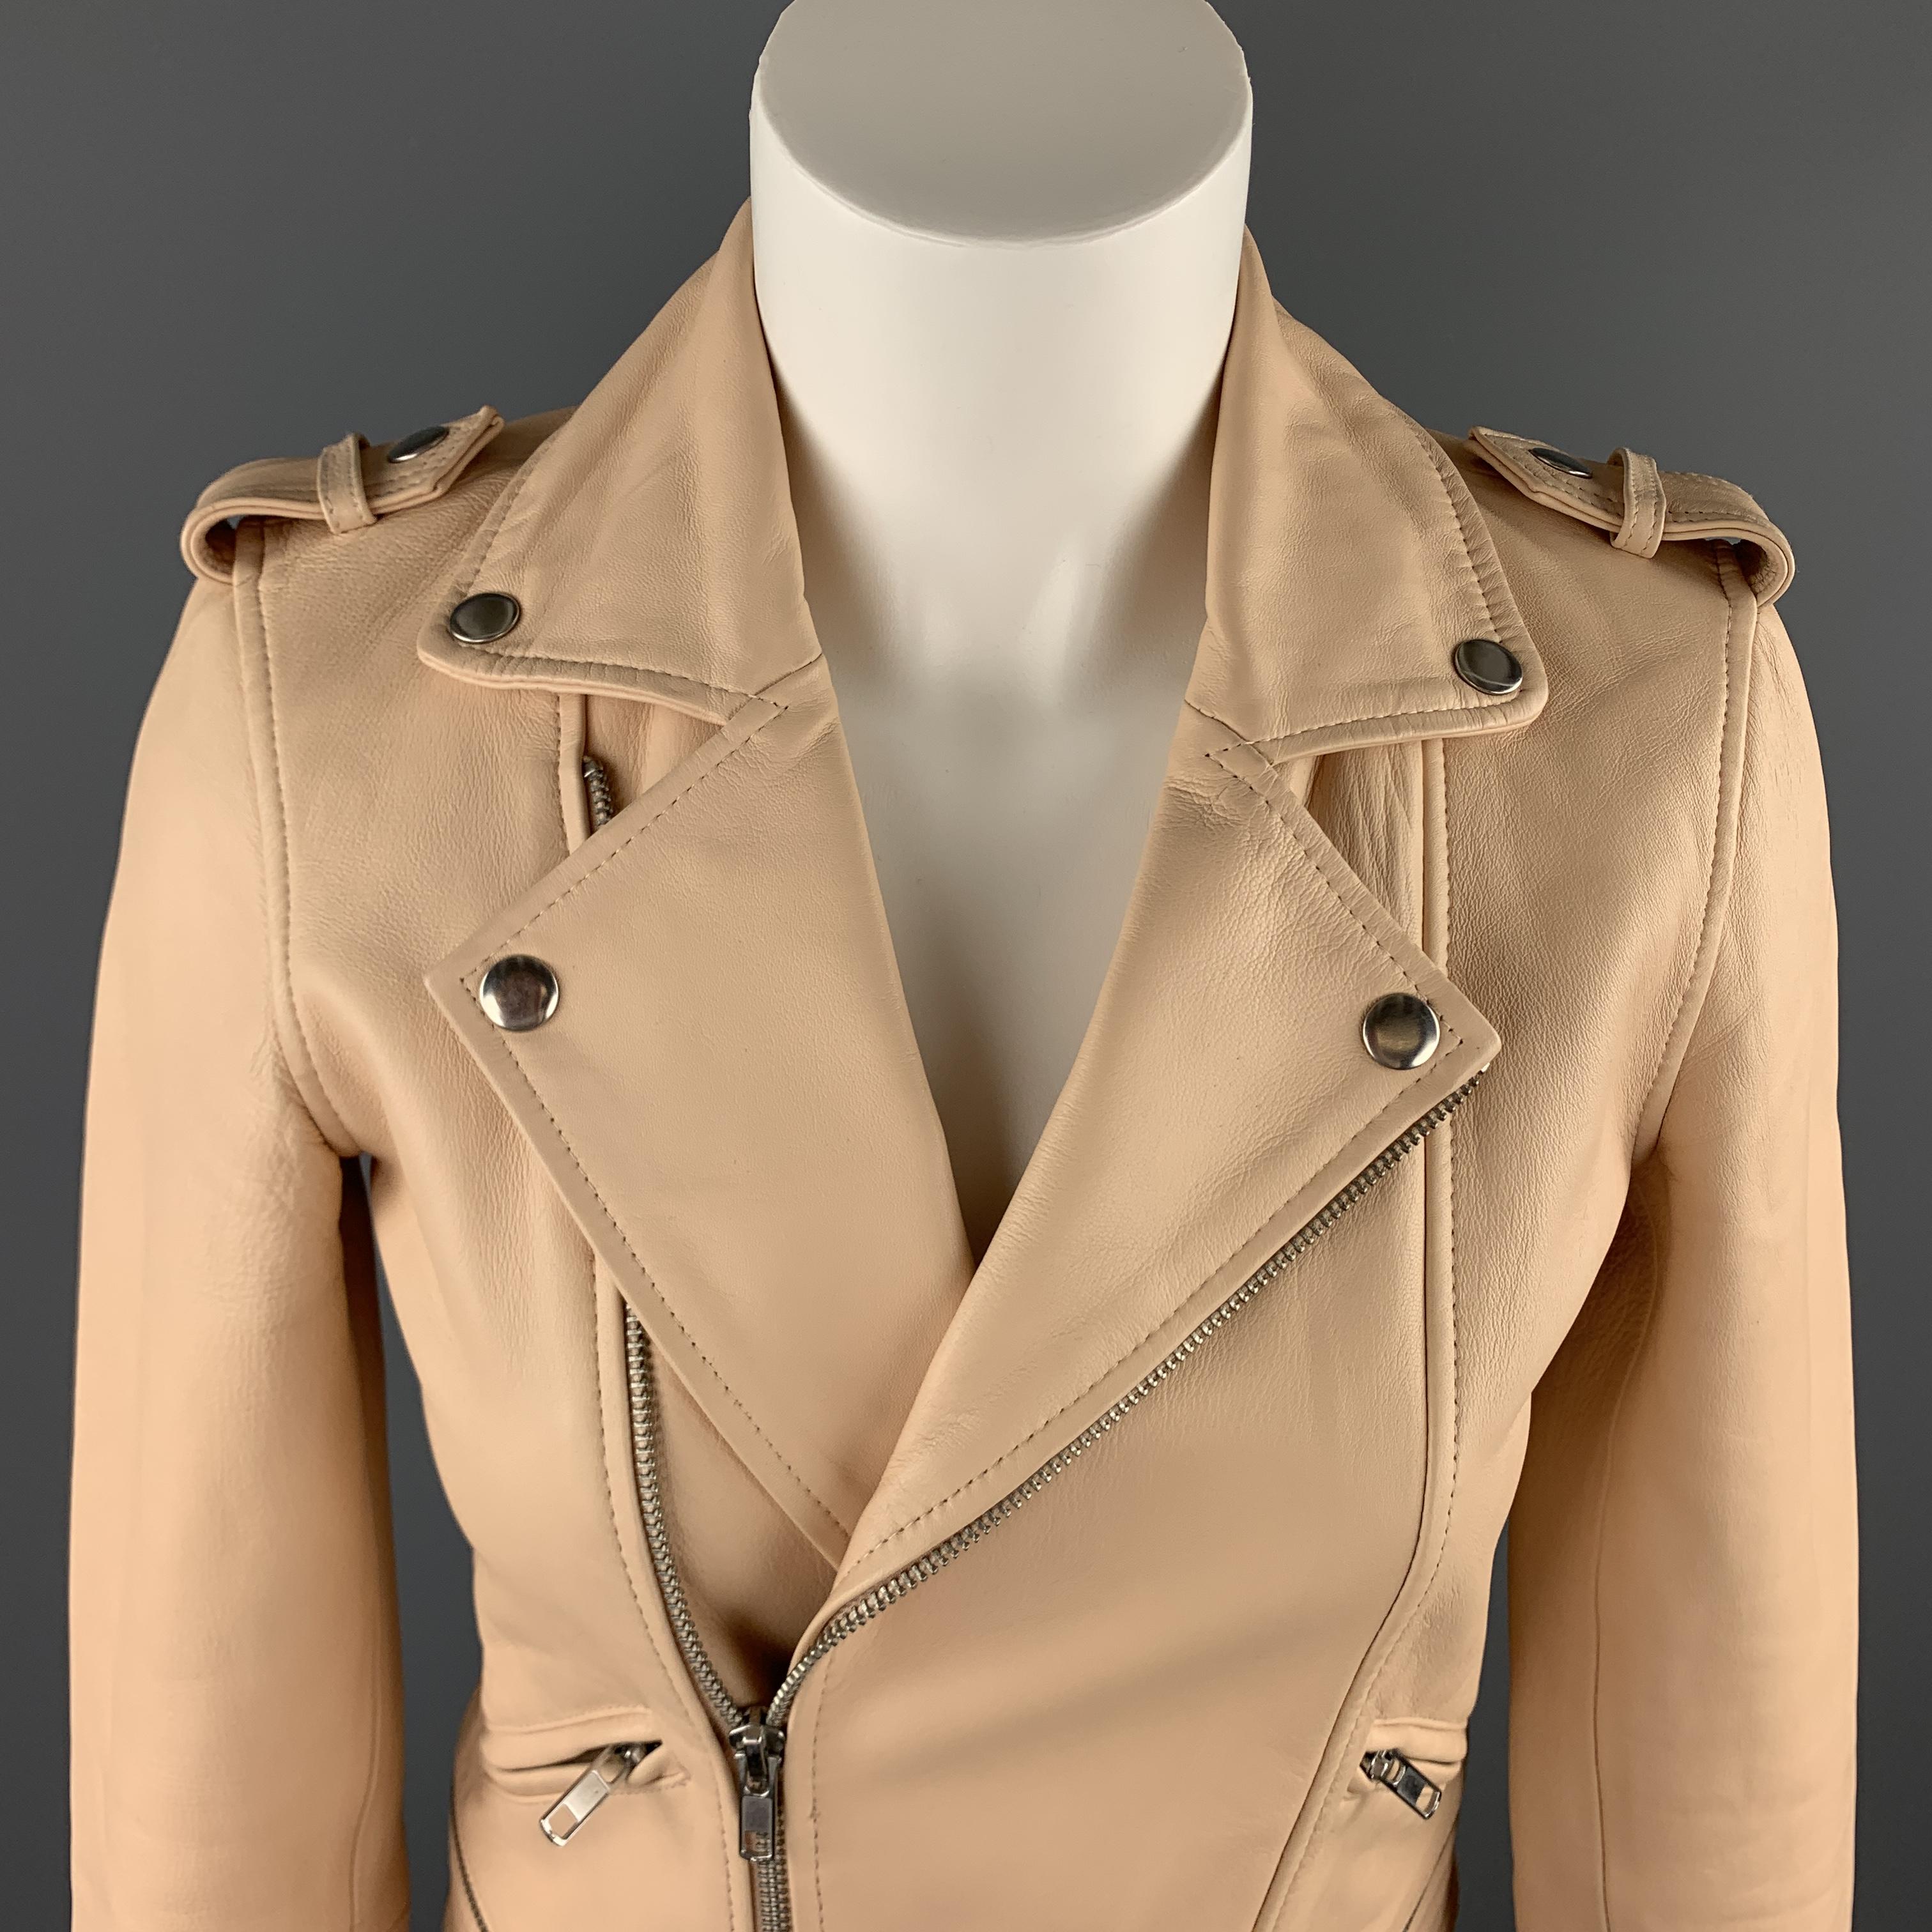 MAJE biker jacket comes in pastel peach pink leather with a pointed lapel, zip pockets, epaulets, and quilted sides. 

Excellent Pre-Owned Condition.
Marked: IT 36

Measurements:

Shoulder: 14 in.
Bust: 36 in.
Sleeve: 23.5 in.
Length: 19 in.